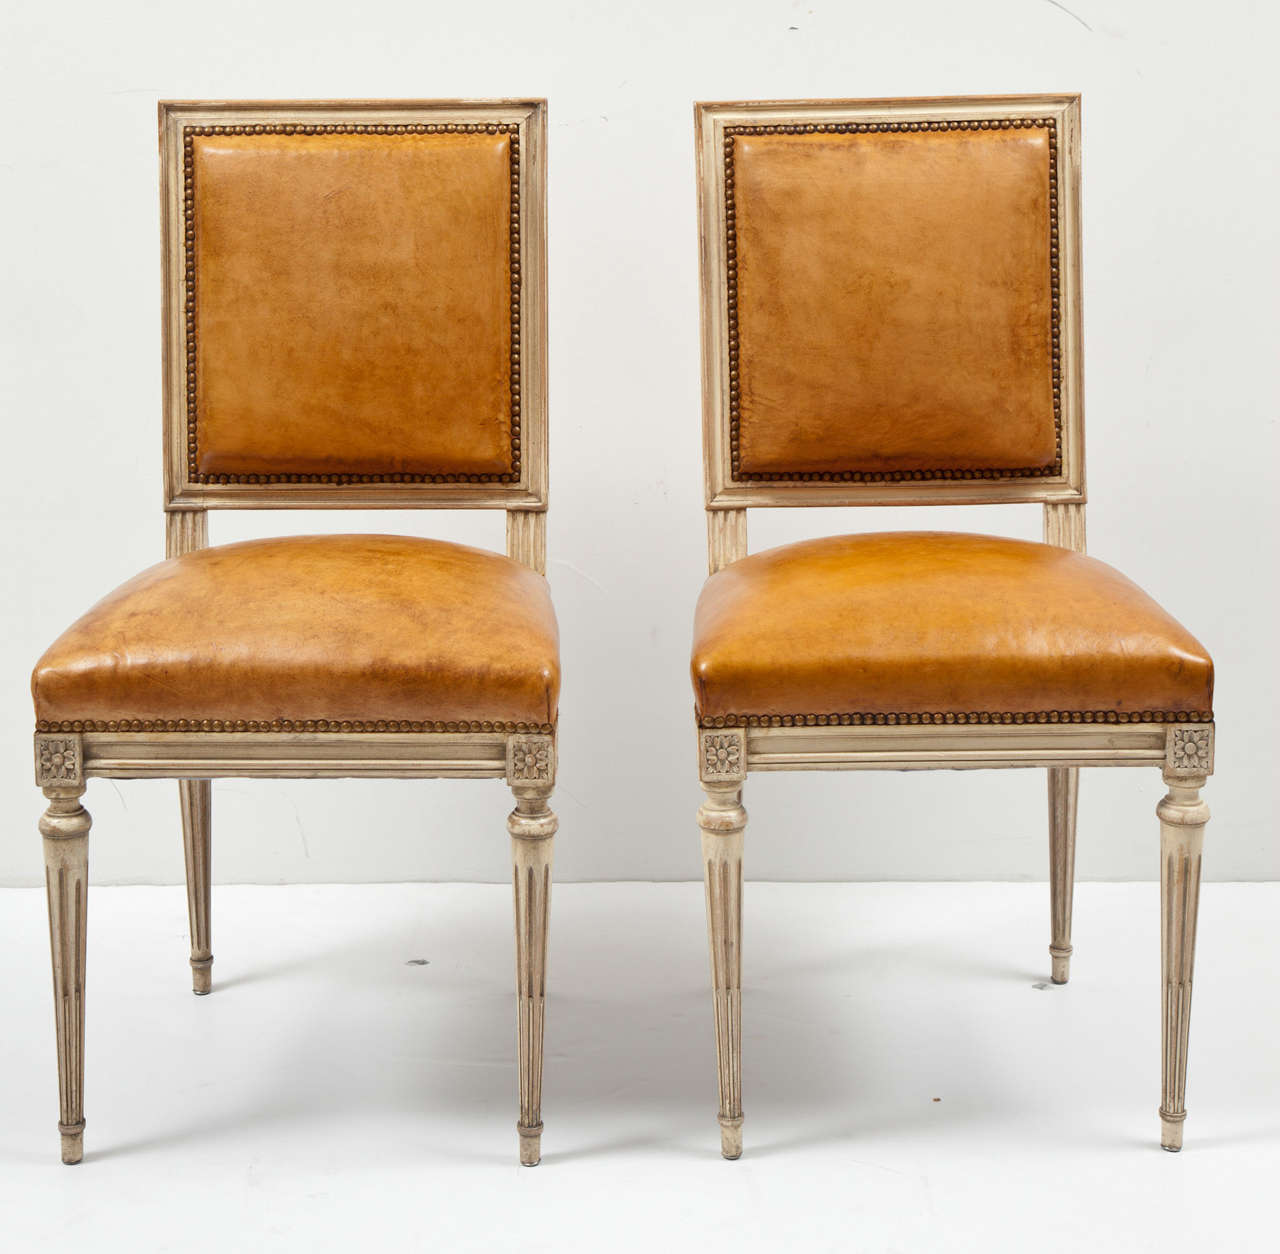 A set of six painted dining chairs in the elegant, understated style of the Louis XVI period. These chairs are newly re-upholstered in a rich, cognac color leather with brass nail heads. With their clean lines, they can be a wonderful additional to